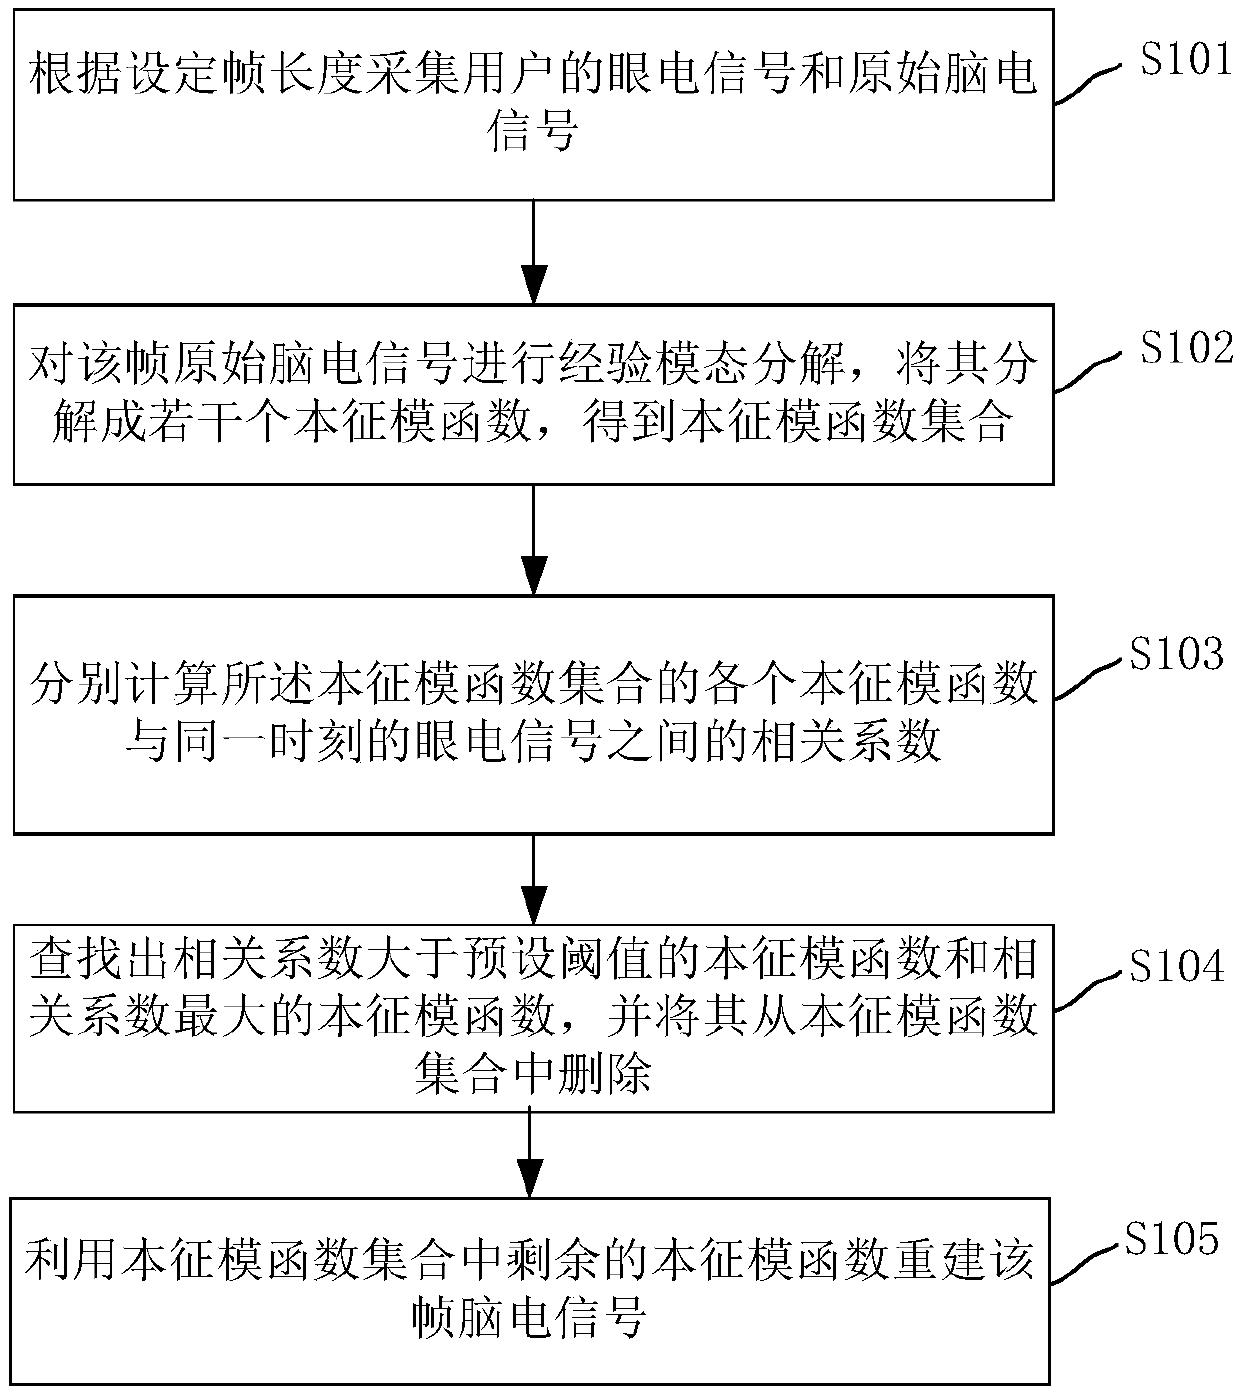 Method and system for removing oculograph artifacts in sleep state analysis